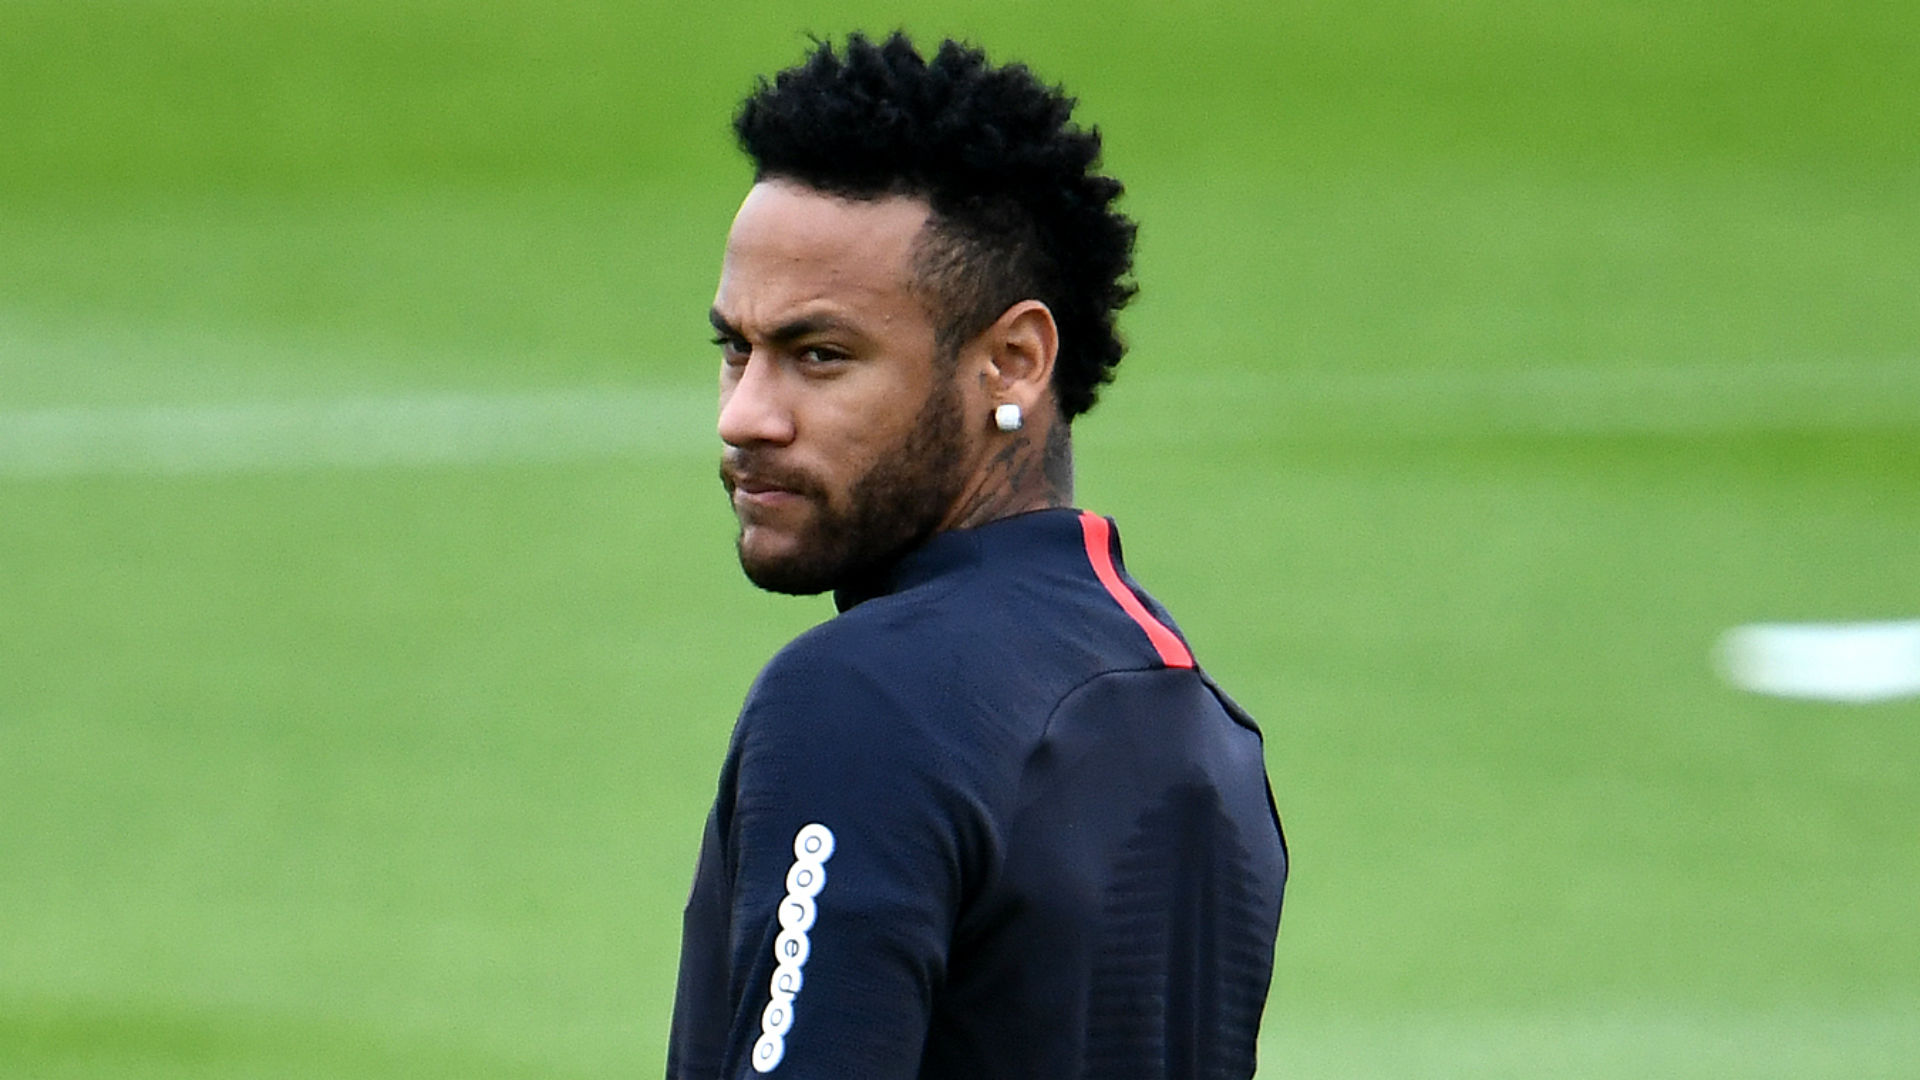 Thomas Tuchel will happily put Neymar back in the Paris Saint-Germain first team, but only once he has a clearer idea on his future.